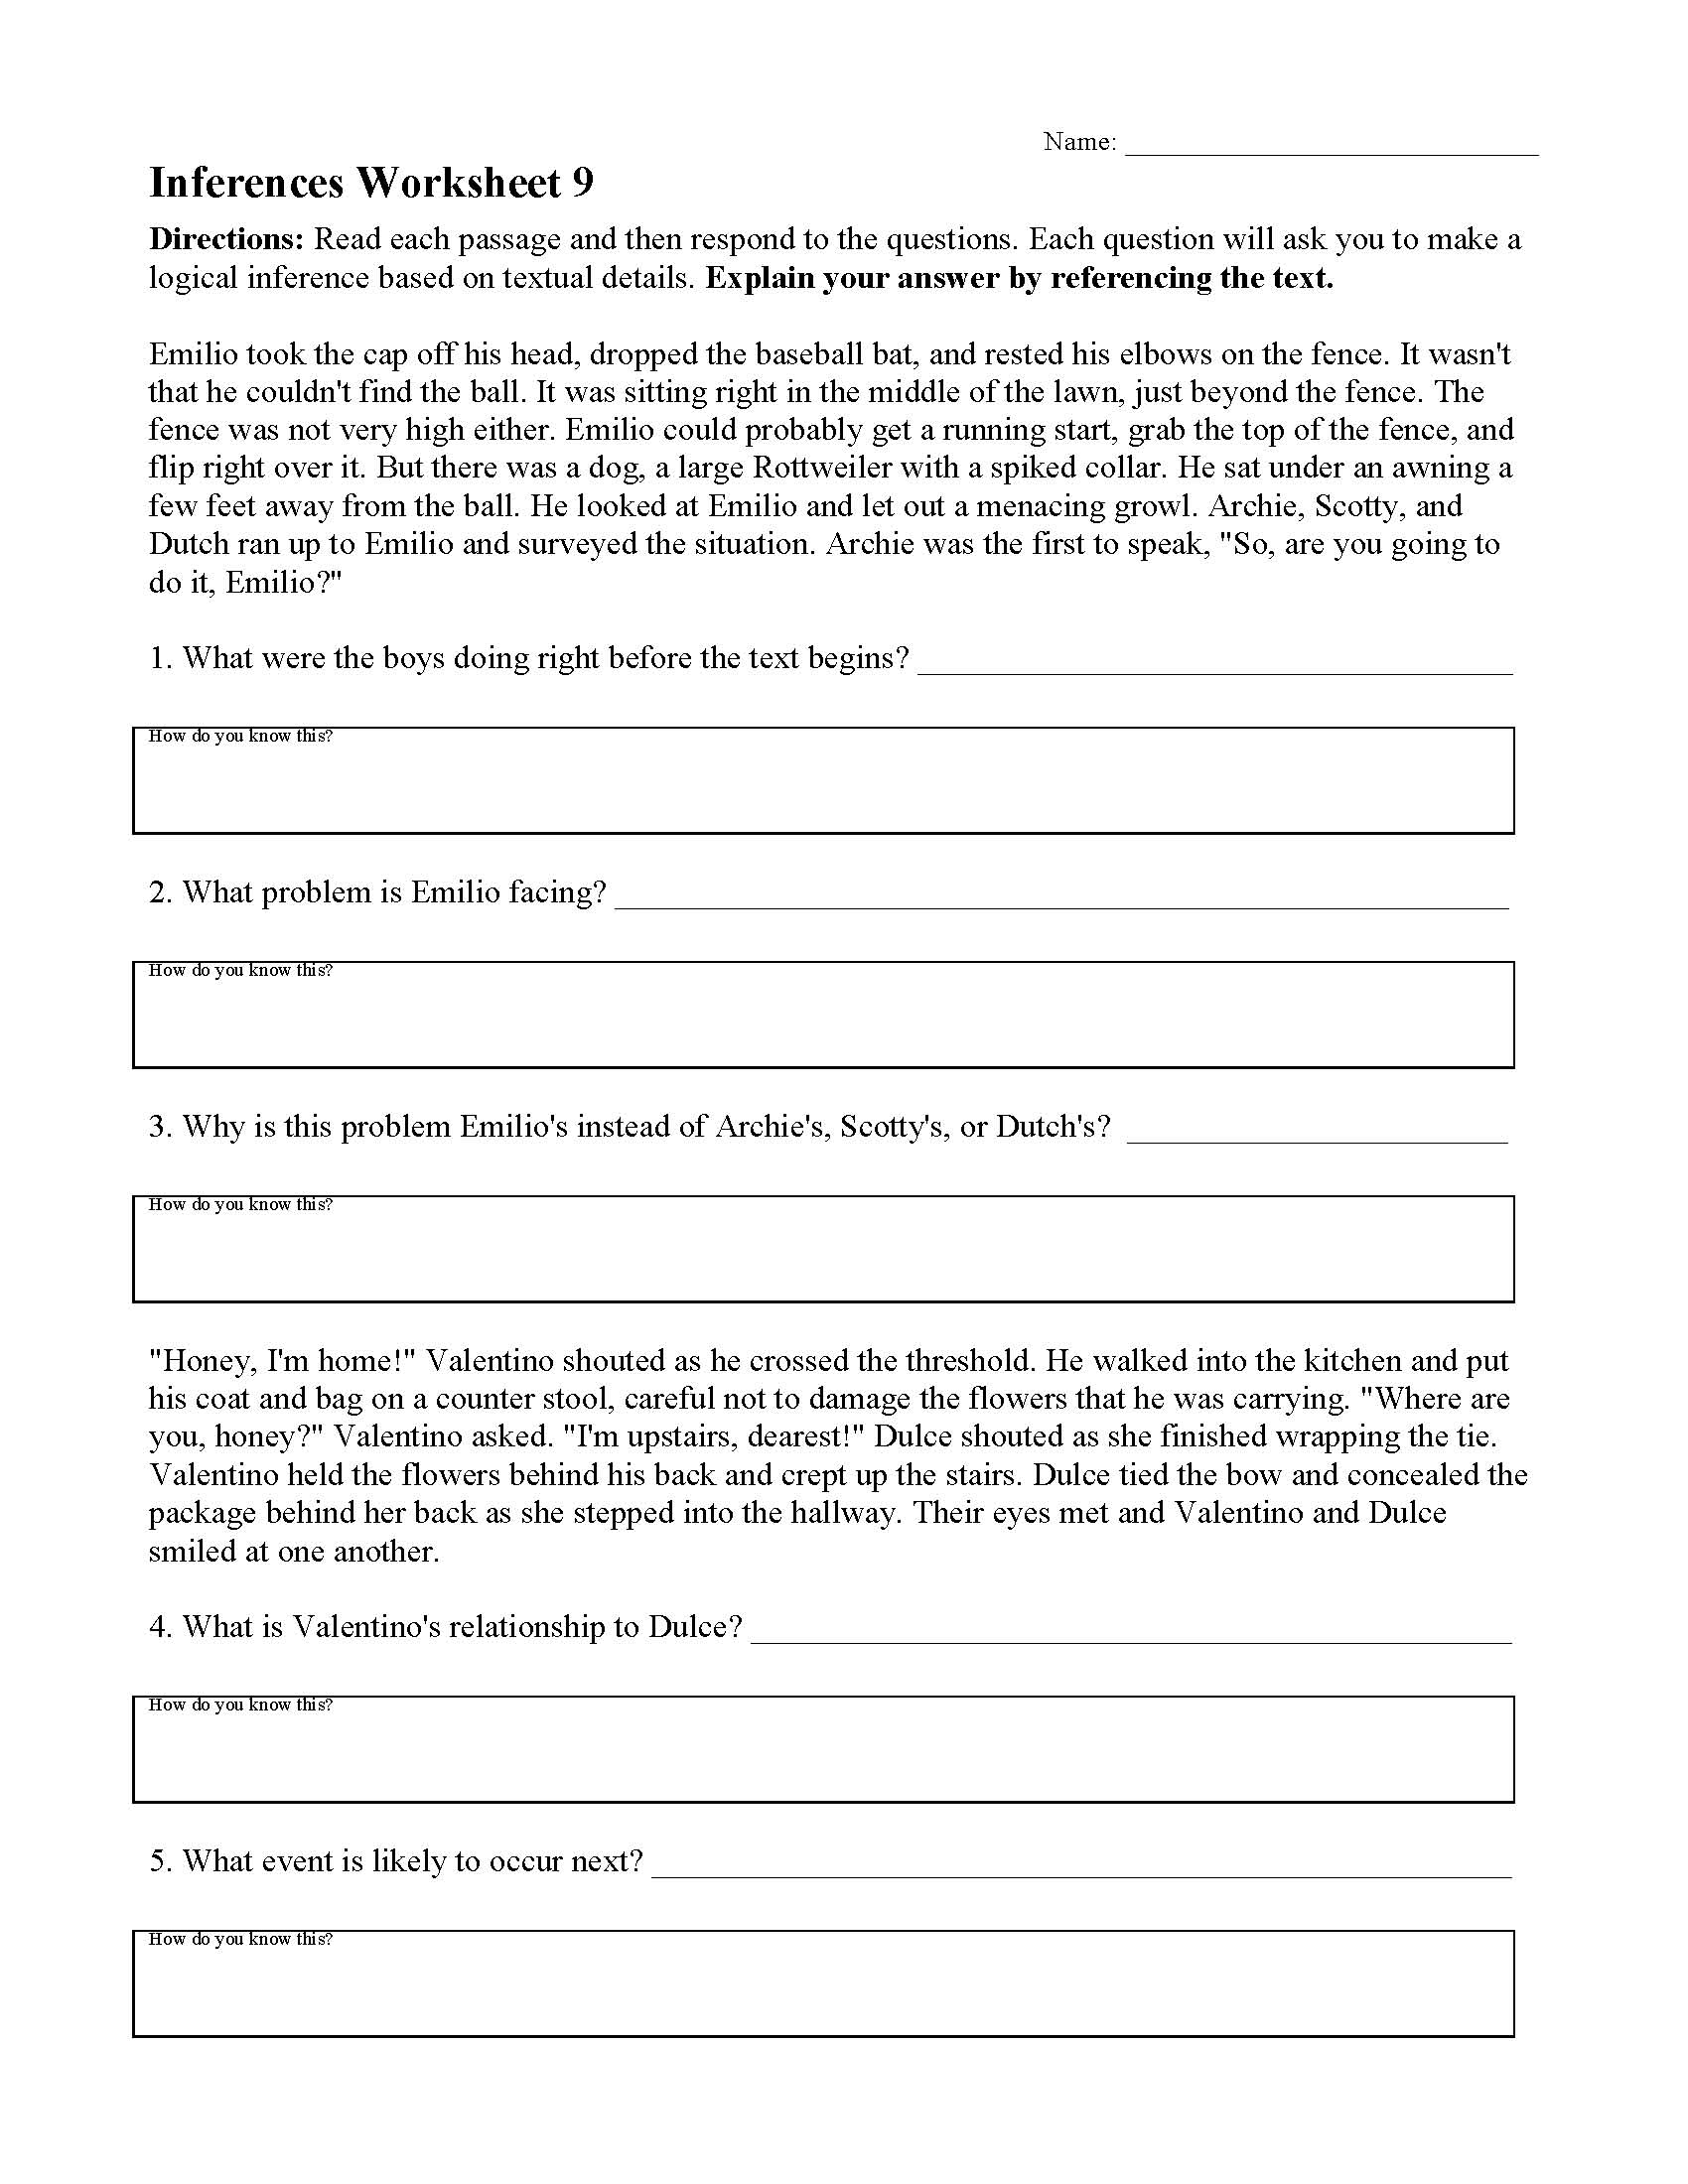 inferences-worksheet-9-preview